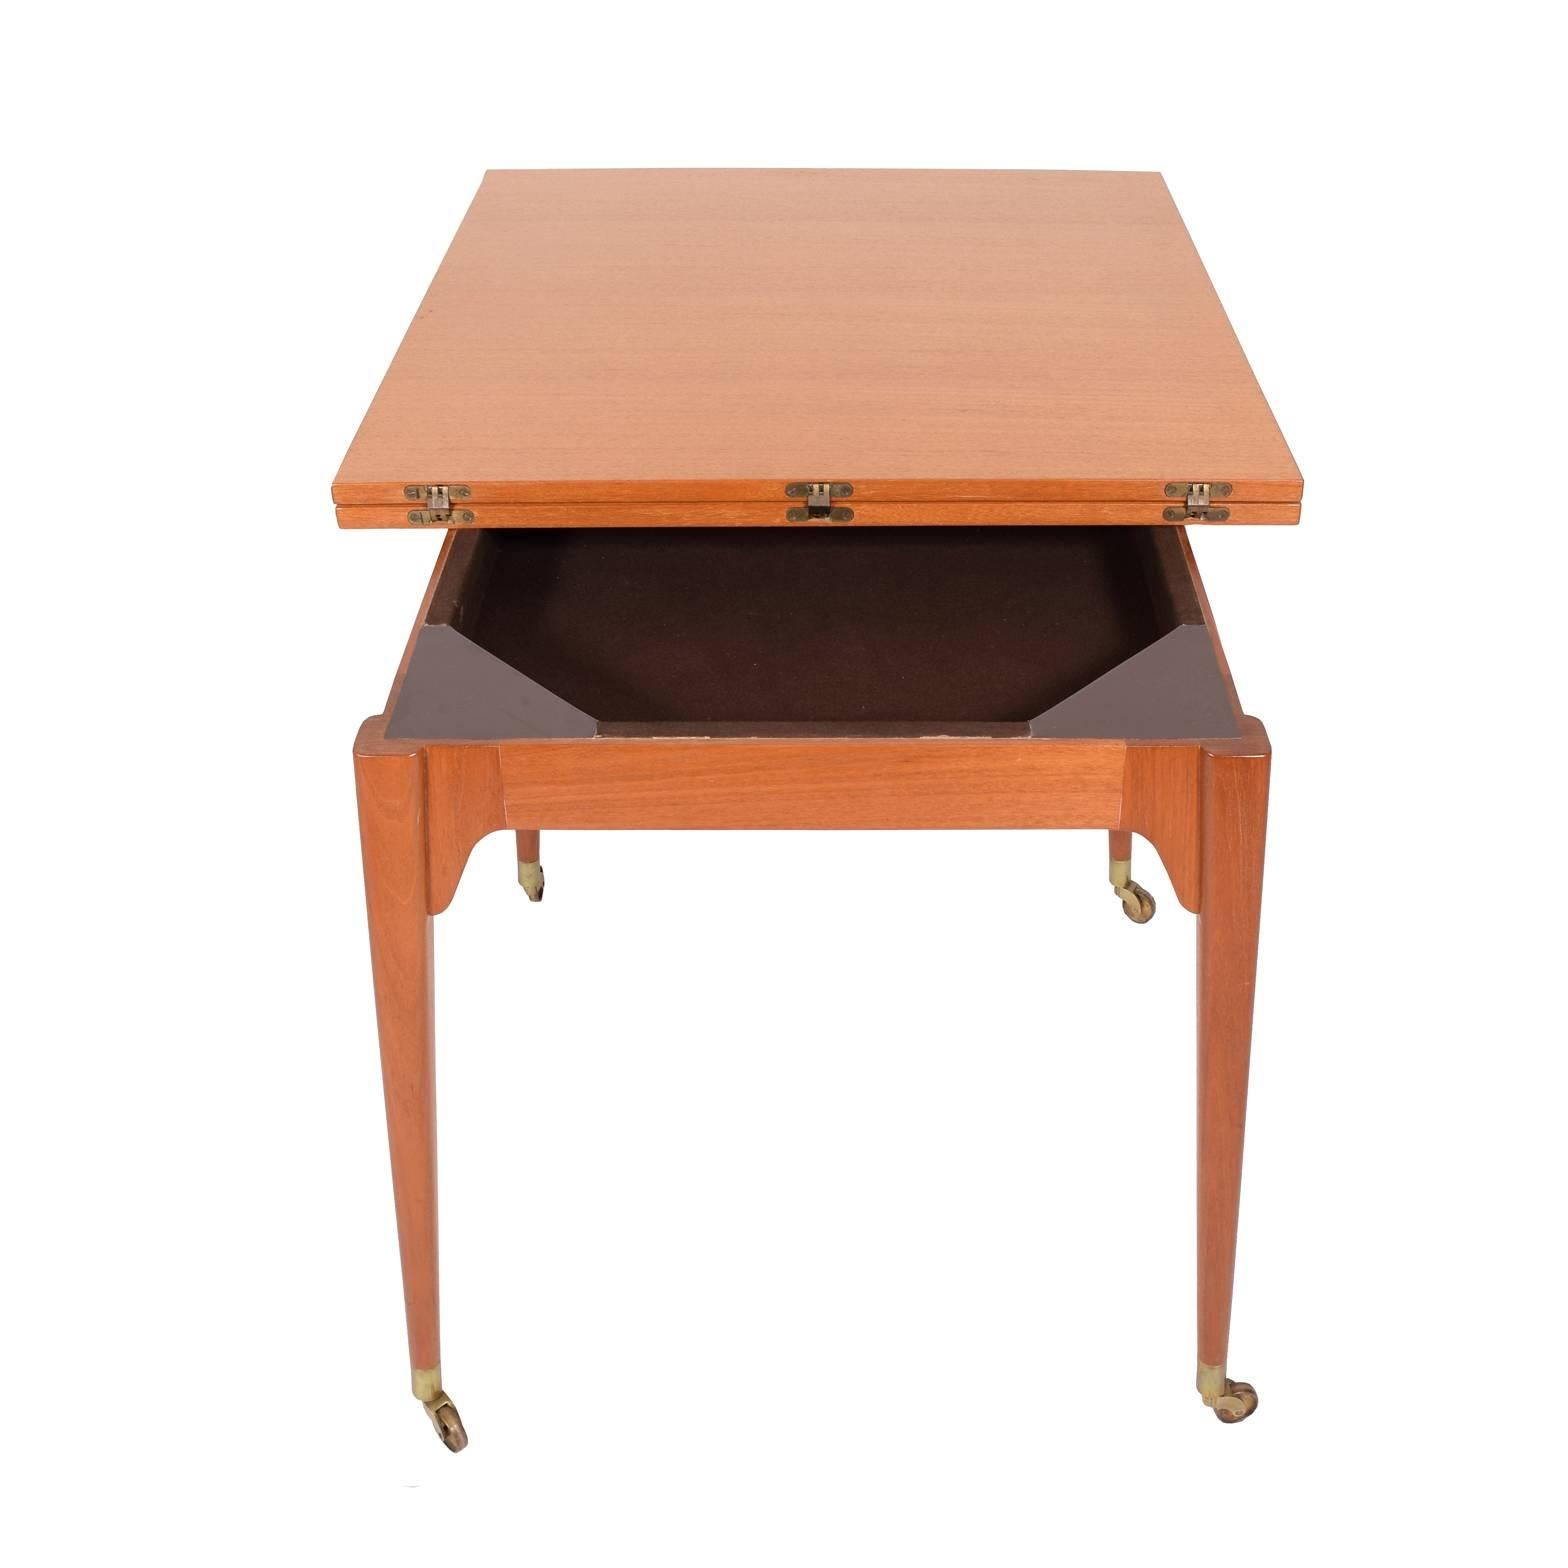 Flip-top table, mahogany top on solid mahogany legs with brass feet on casters. Top pivots and unfolds. Measures: Extends to 68